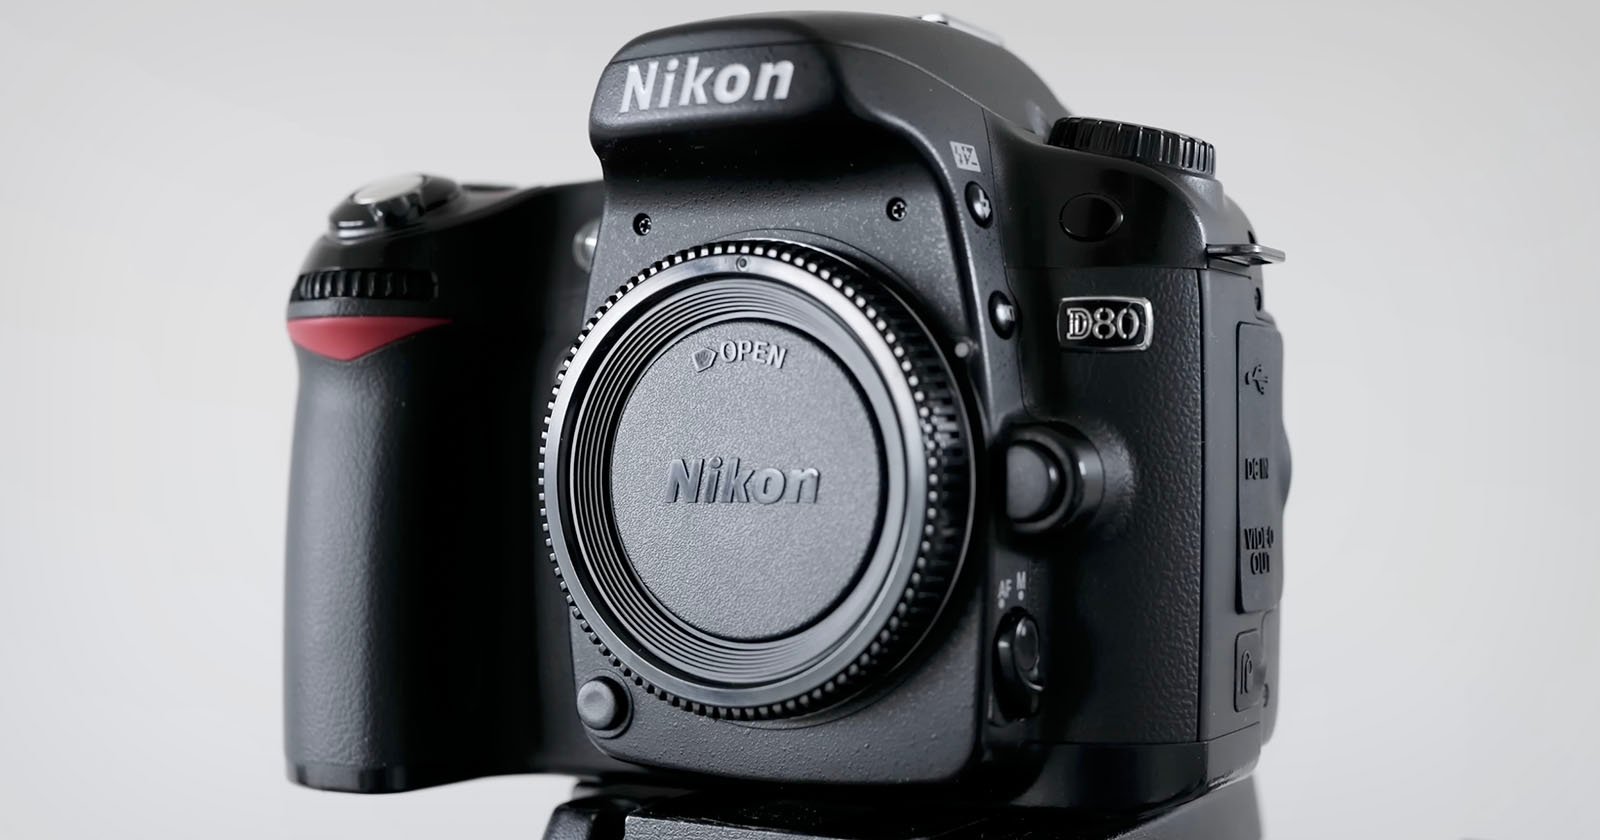 The Nikon D80 is an Amazing Camera for Under $100